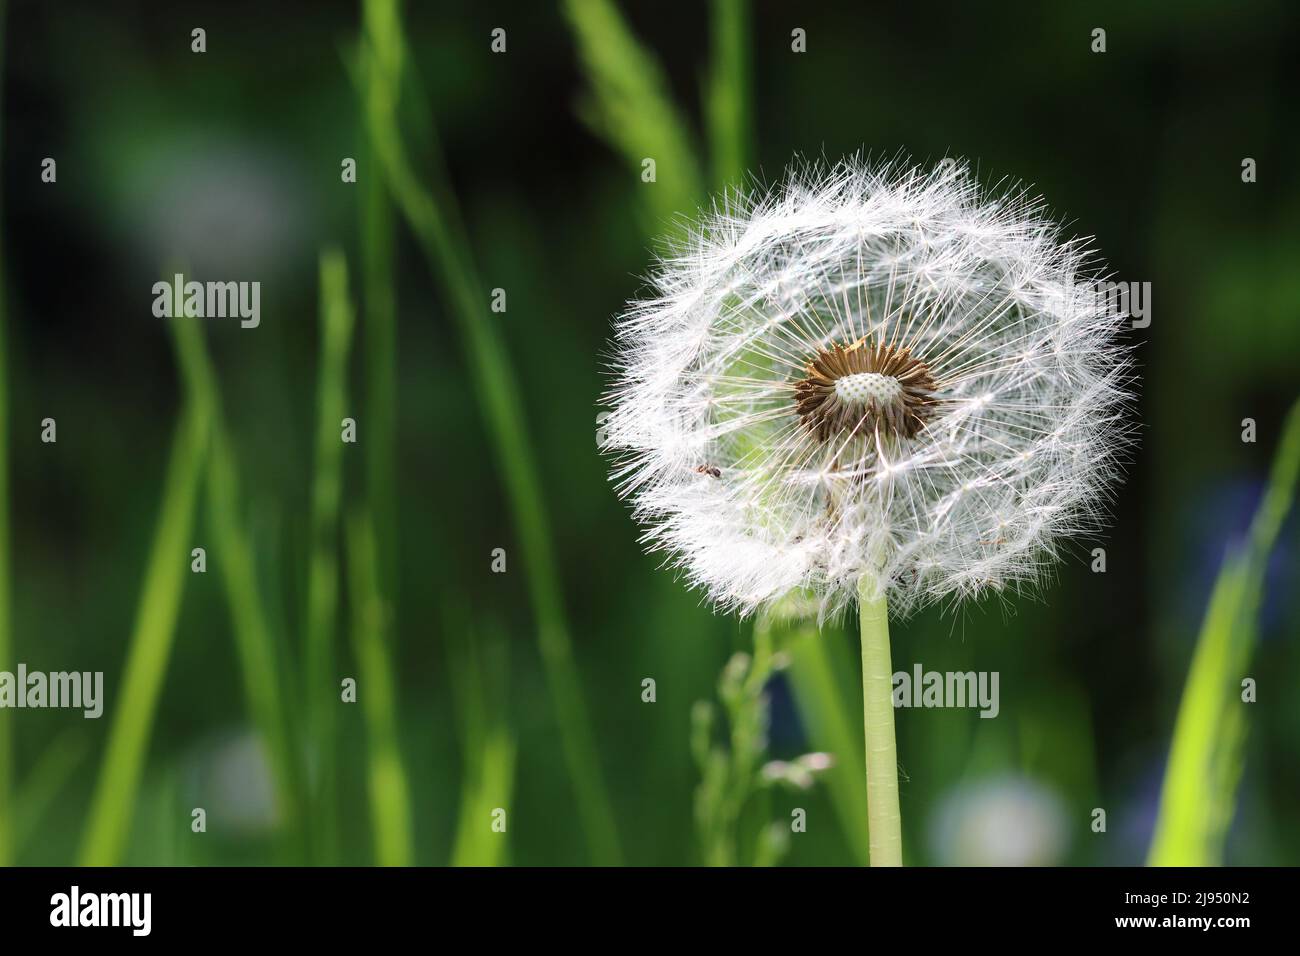 close-up of a seed head of a dandelion flower against a green blurred background, copy room Stock Photo